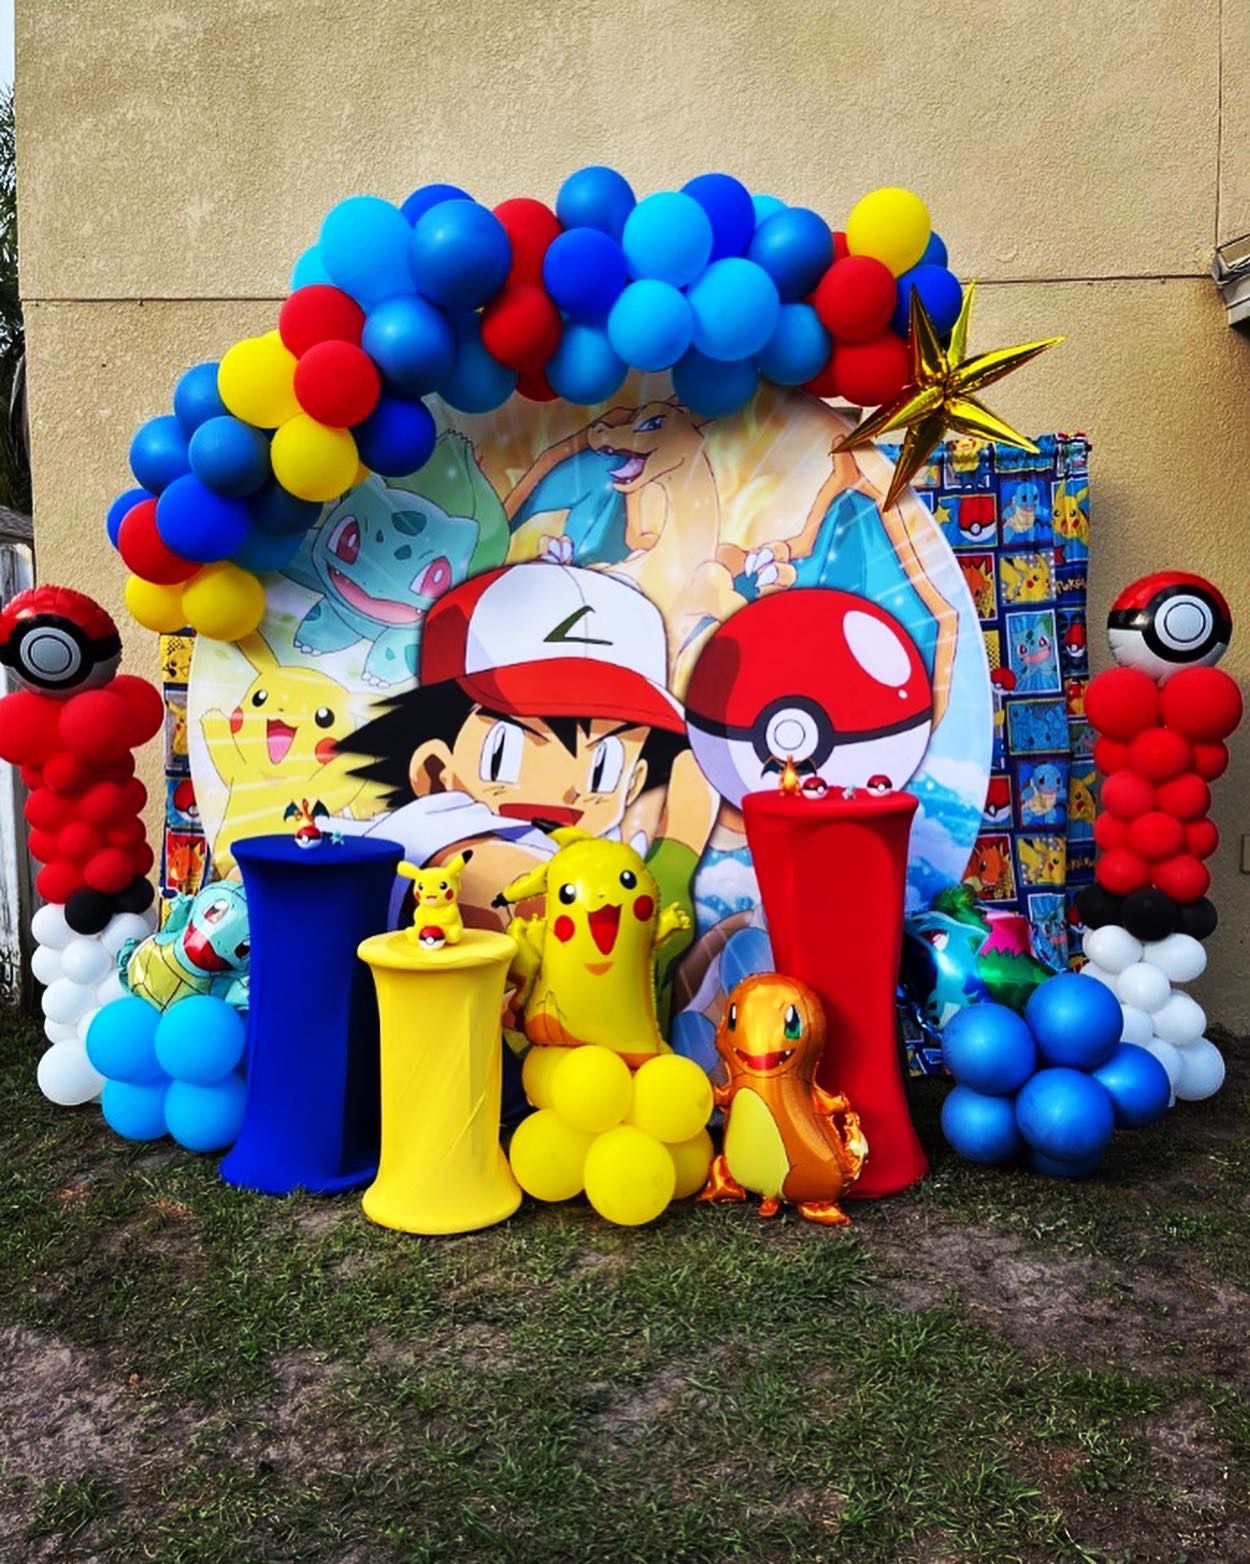 Pokémon Party Decoration Set-Up for Sale in Kissimmee, FL - OfferUp